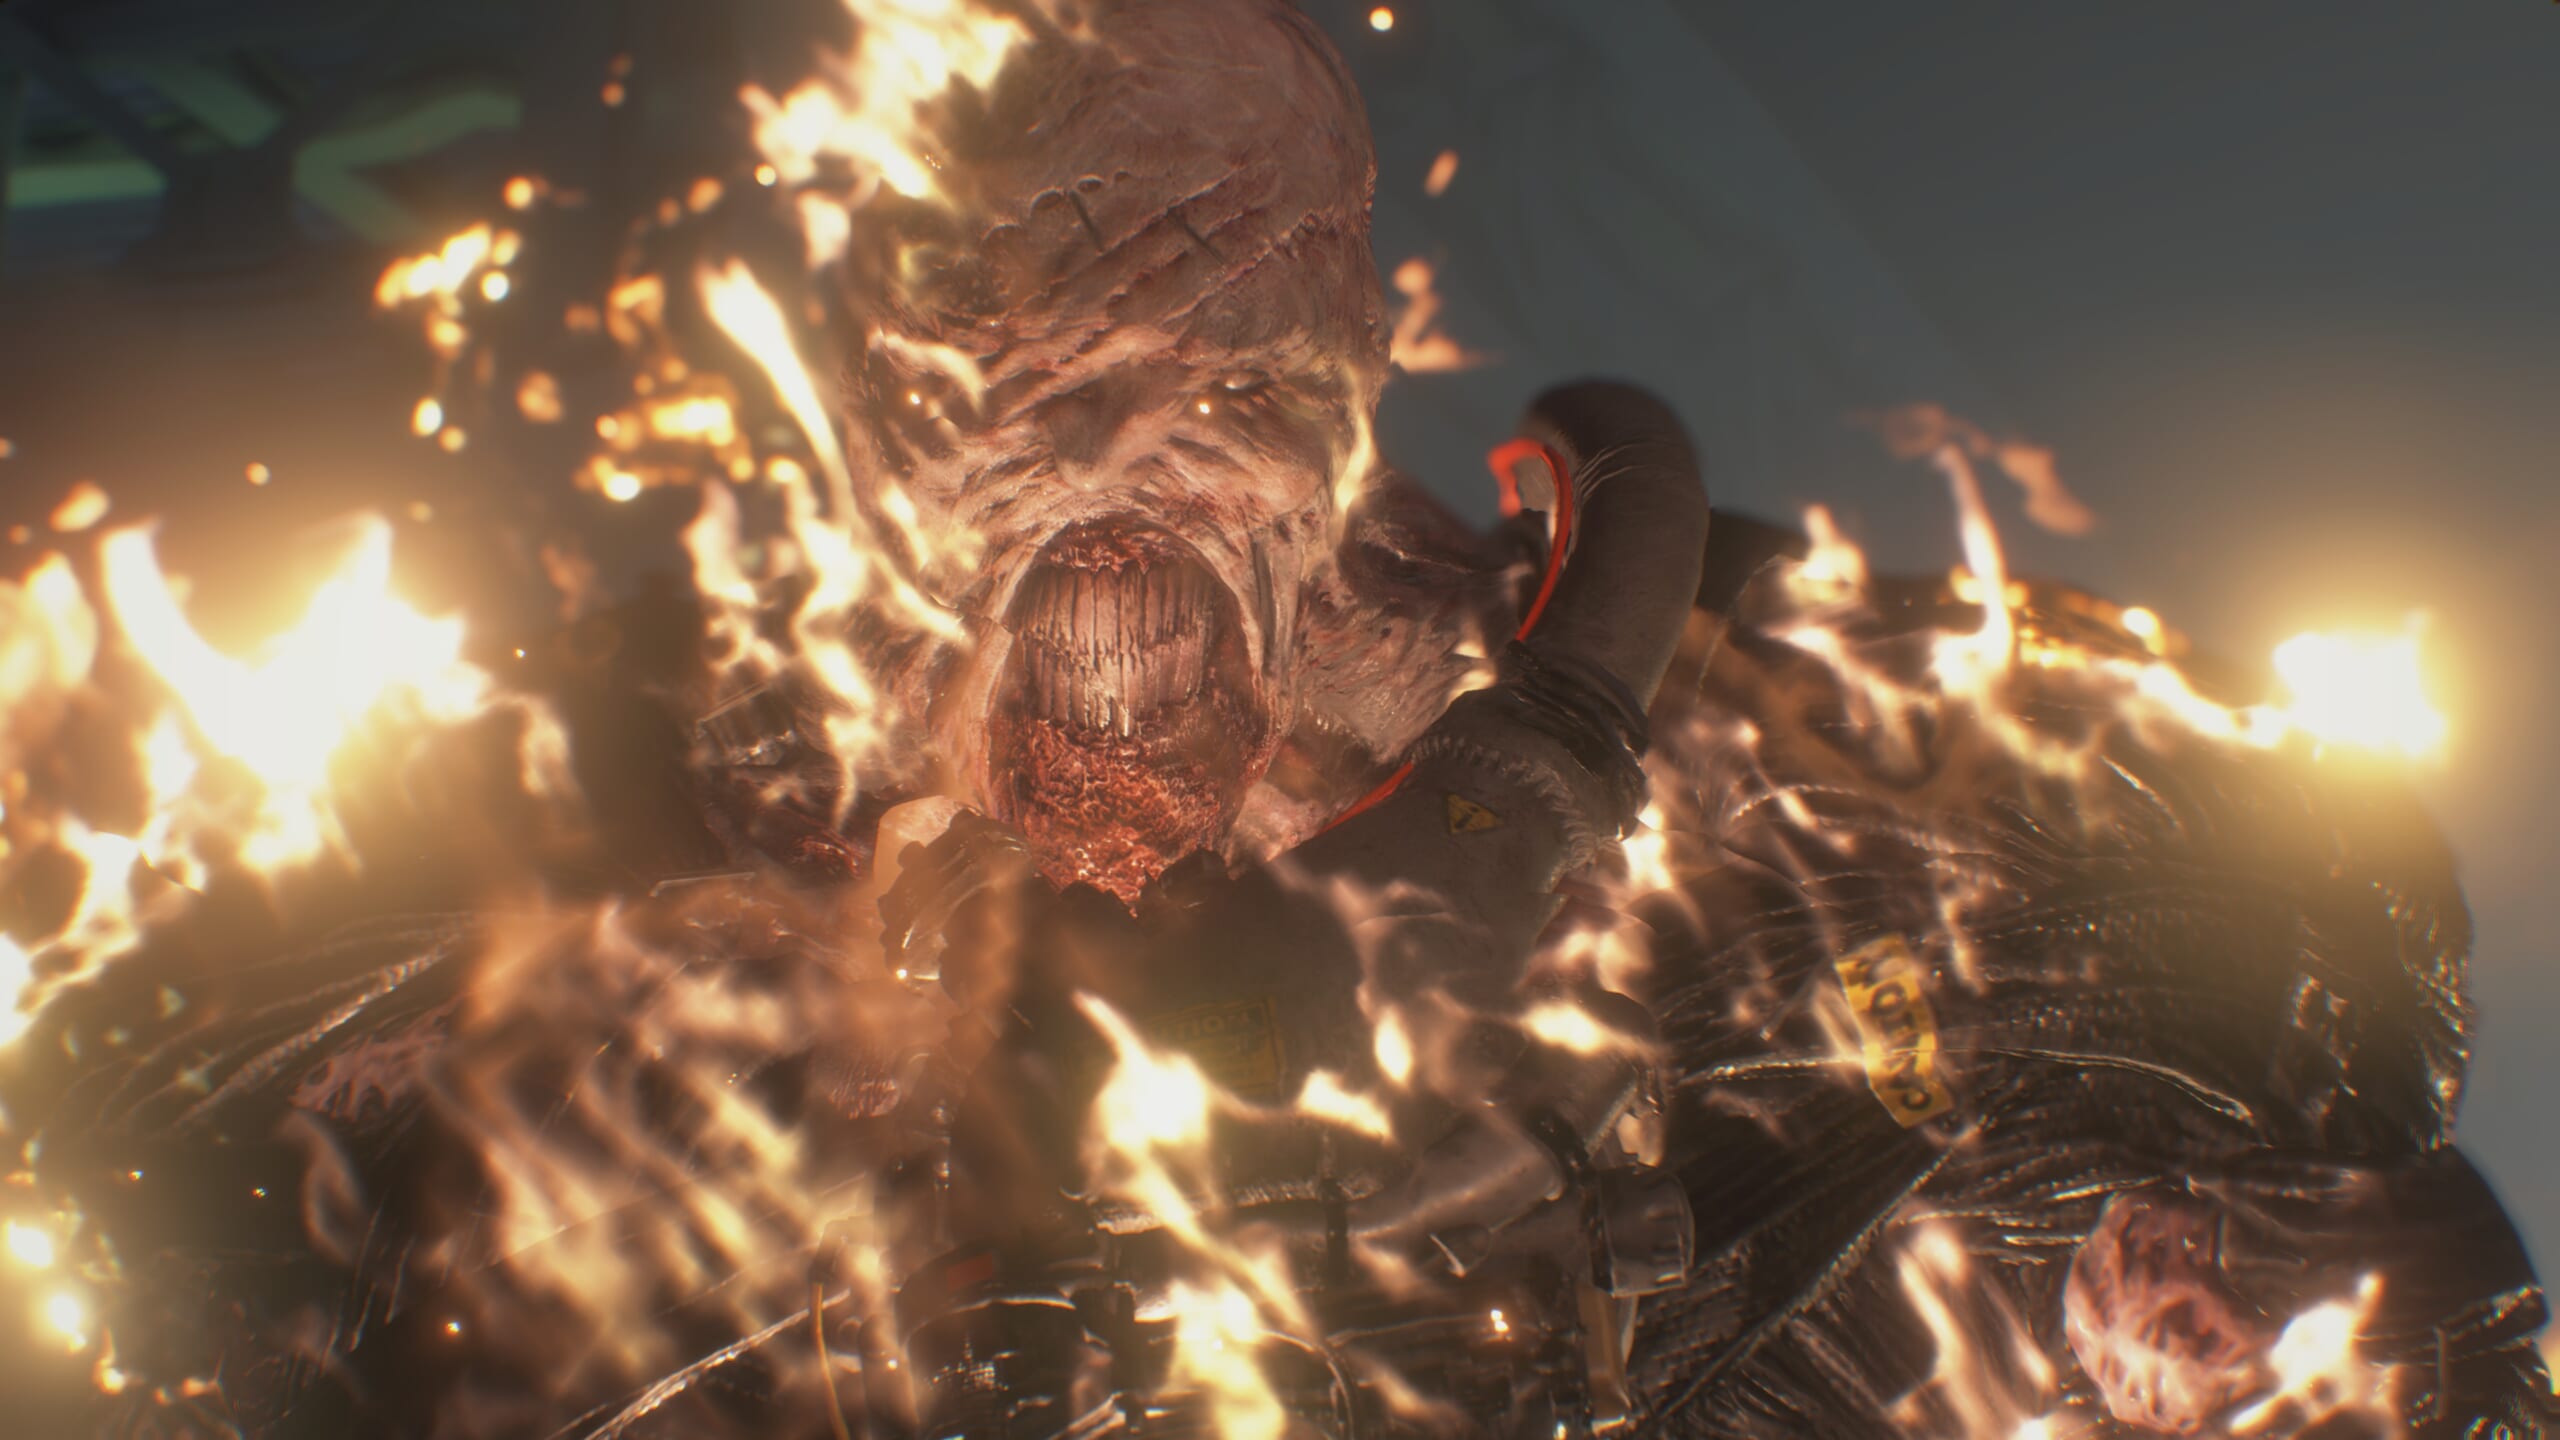 Resident Evil 3 Remake Nemesis Trailer, Hunters and Other